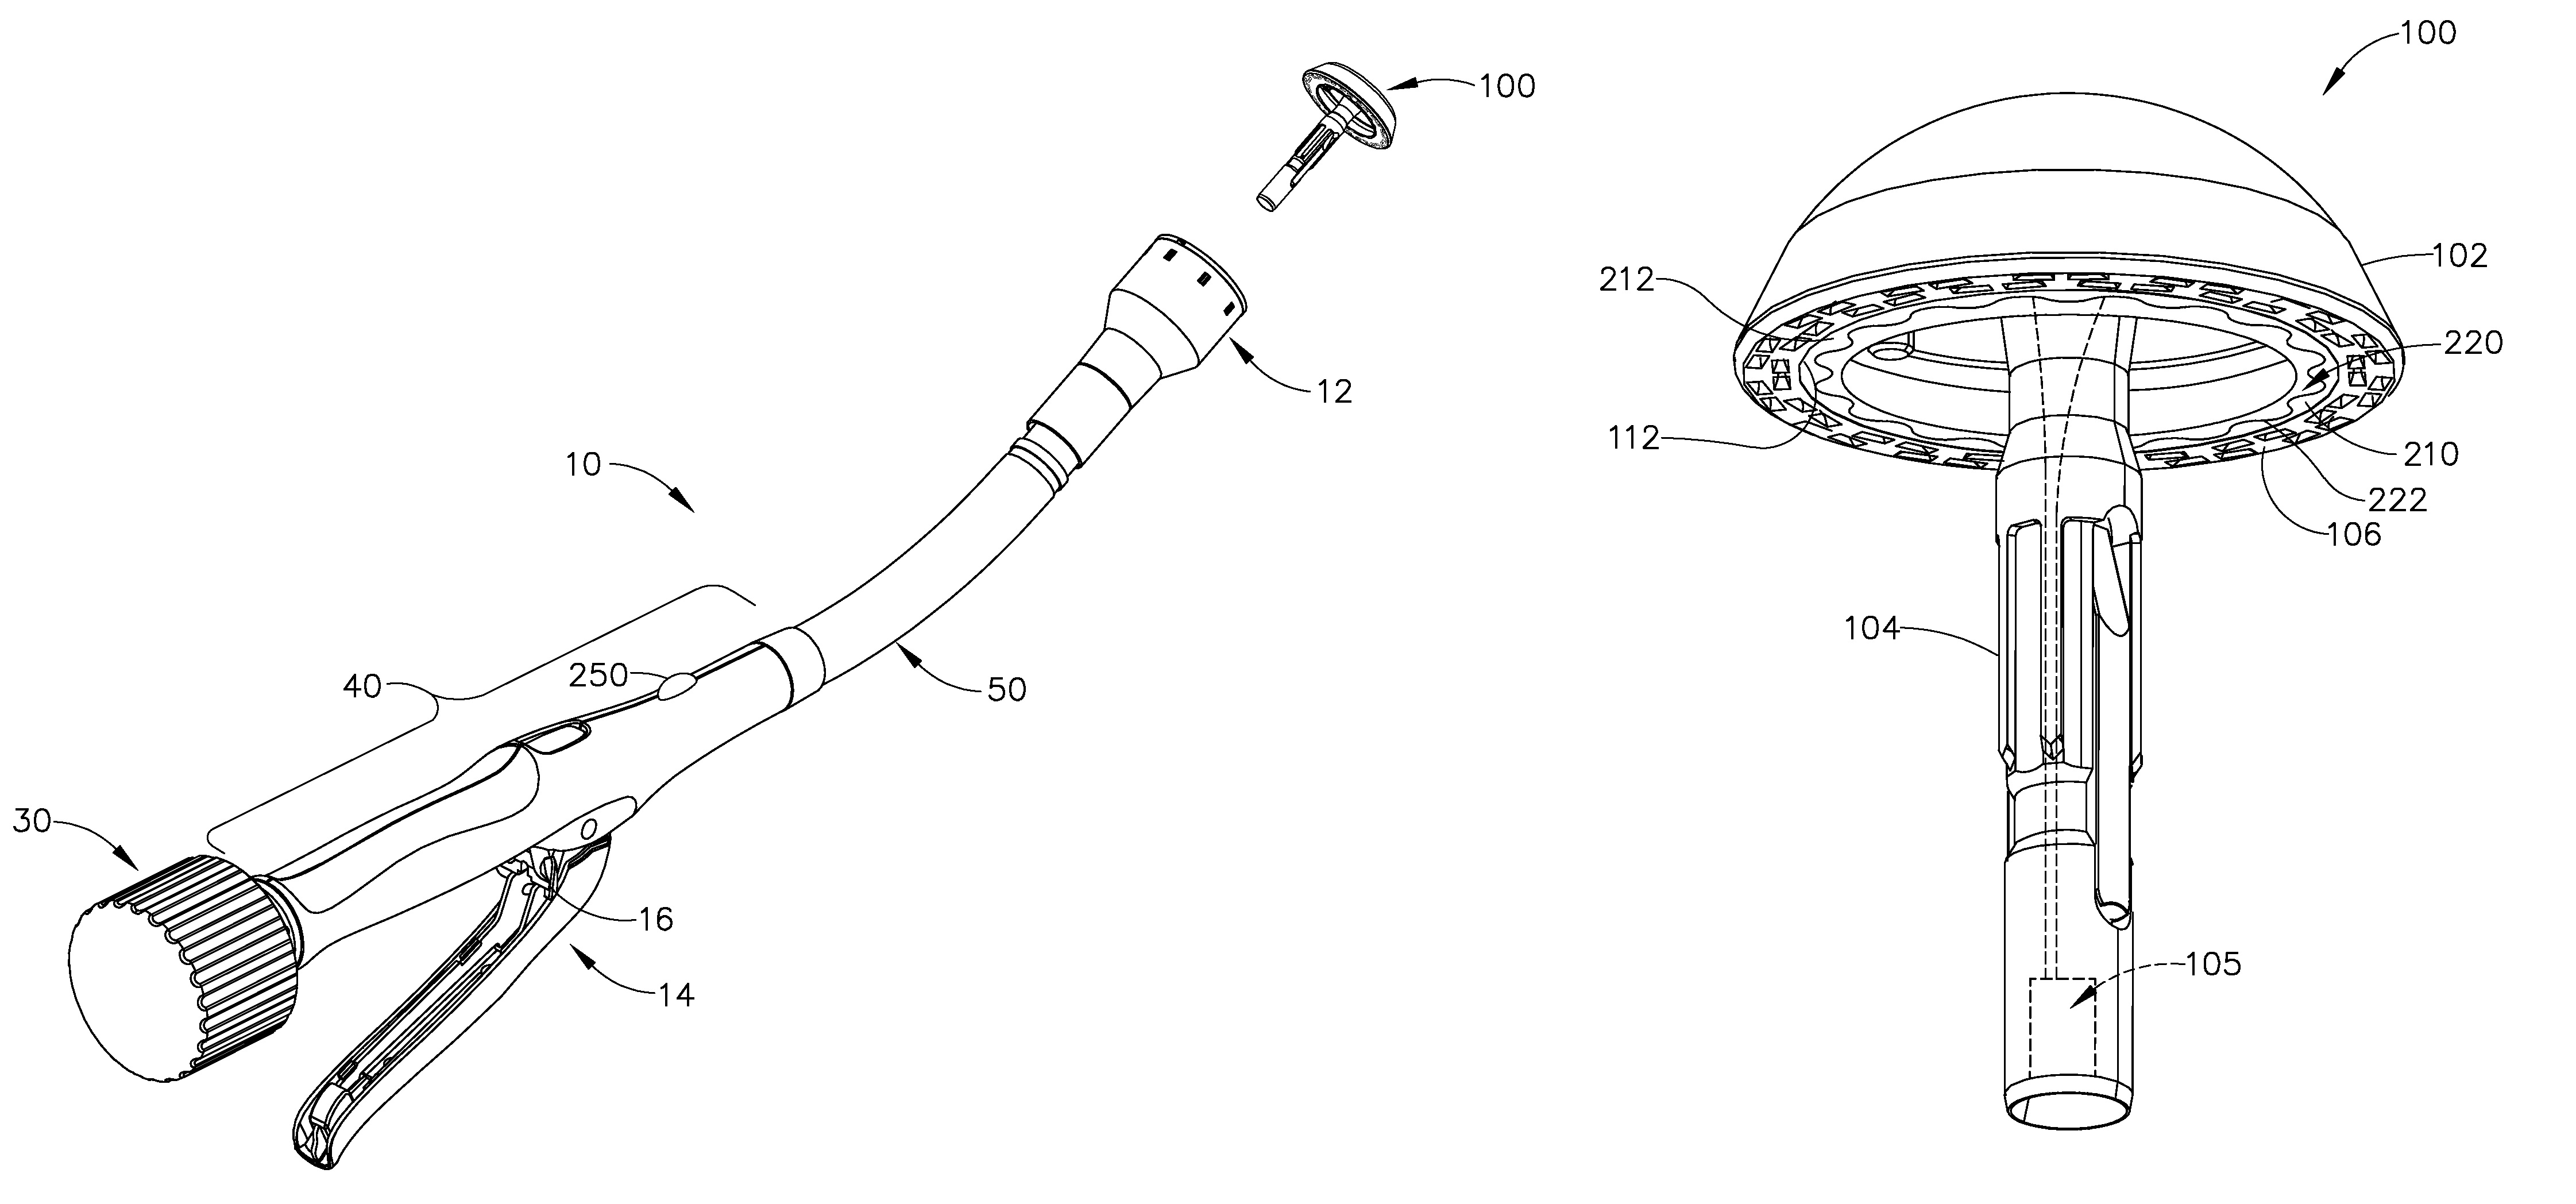 Surgical stapling instrument with device for indicating when the instrument has cut through tissue